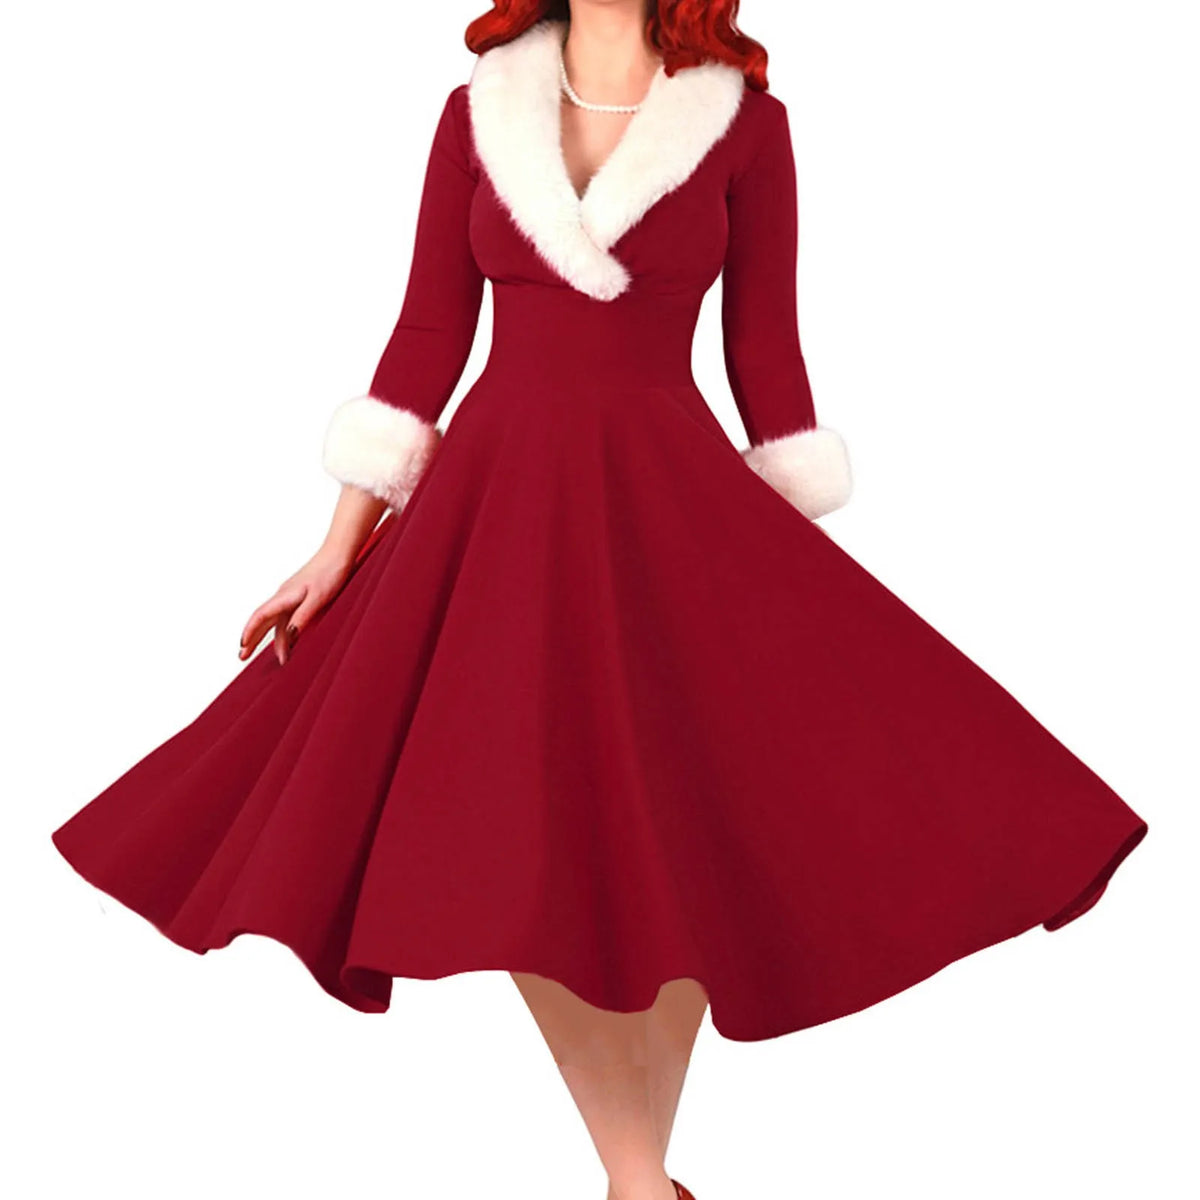 New Year Christmas Dress Women Christmas Sexy Costume Long Sleeve V Neck Plush Warm Party Pleated Tunic Swing Dresses